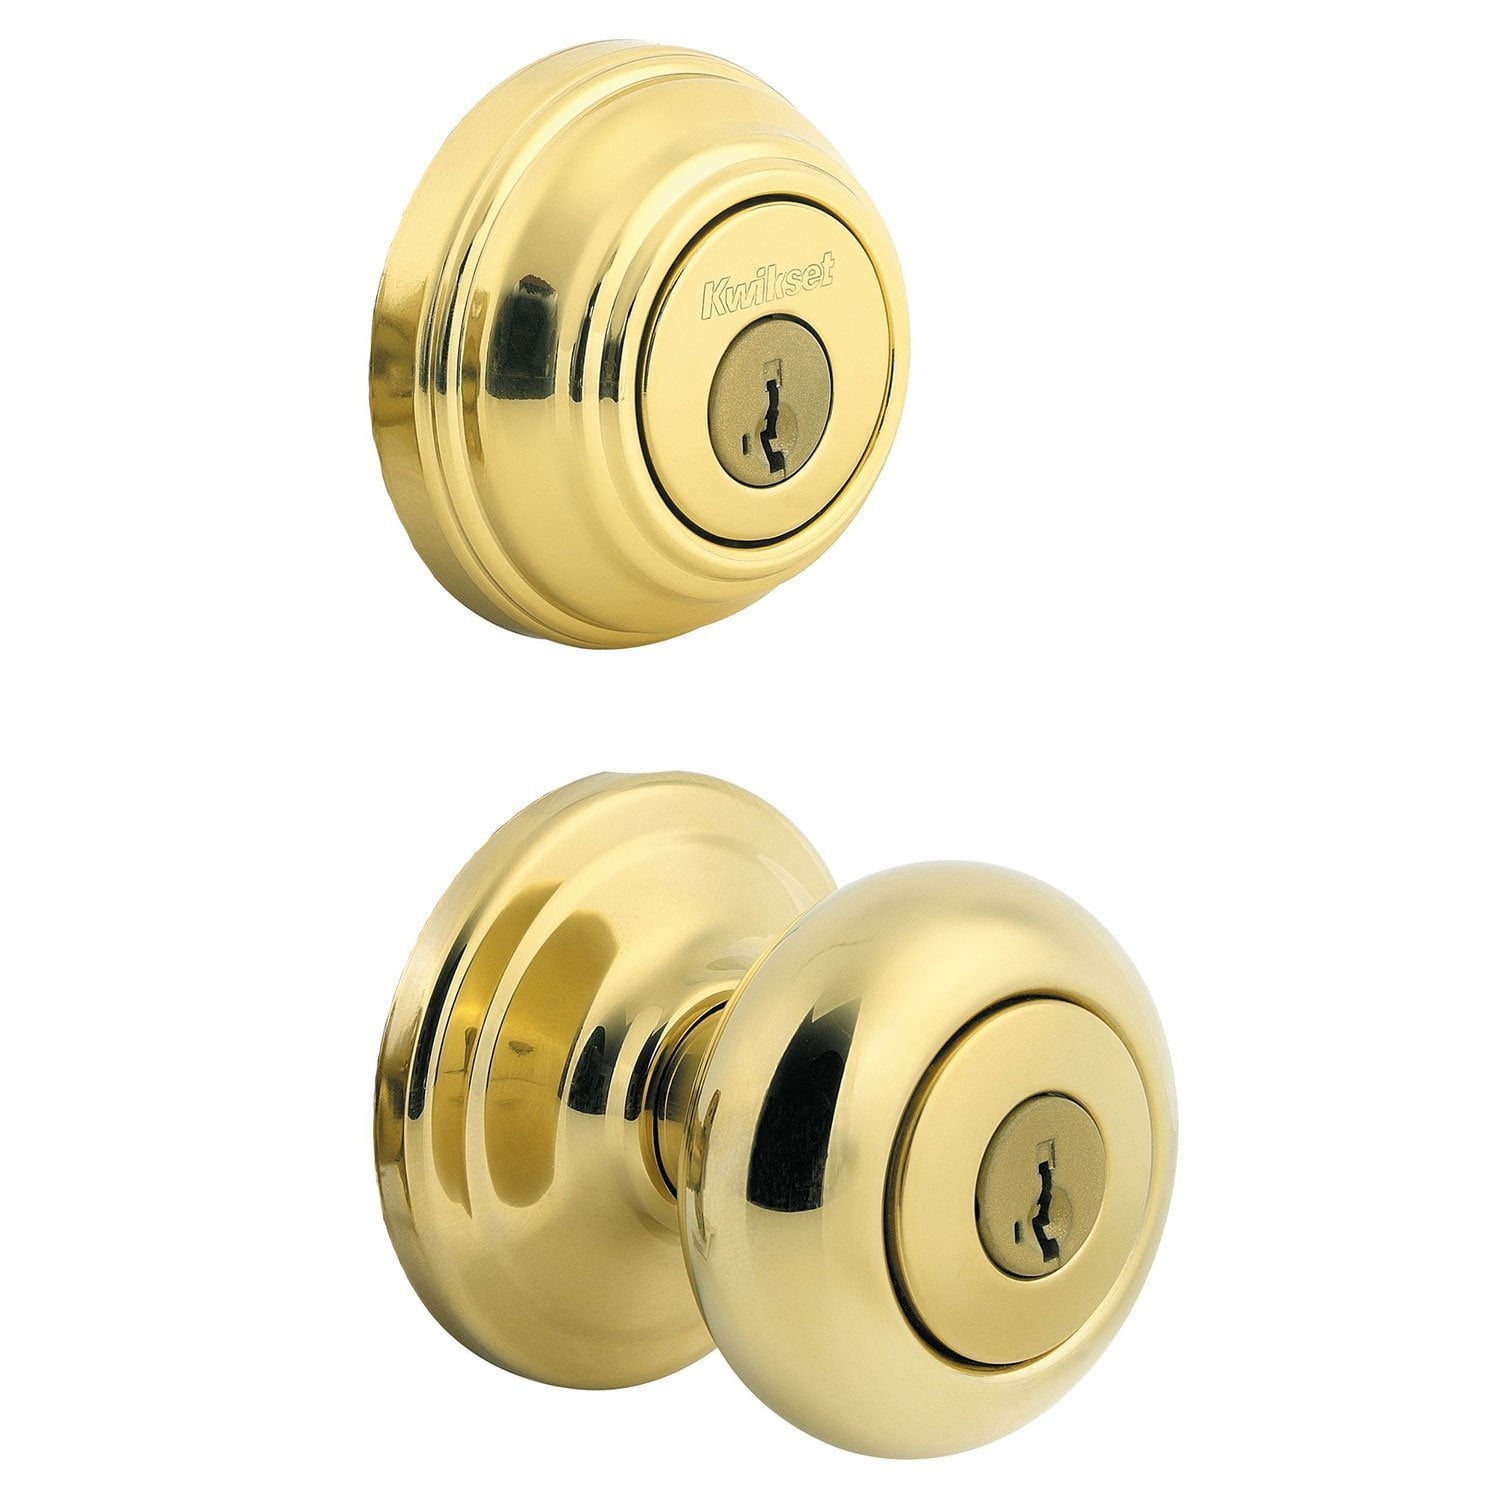 Kwikset 991 Juno Entry Knob and Single Cylinder Deadbolt Combo Pack  featuring SmartKey in Polished Brass